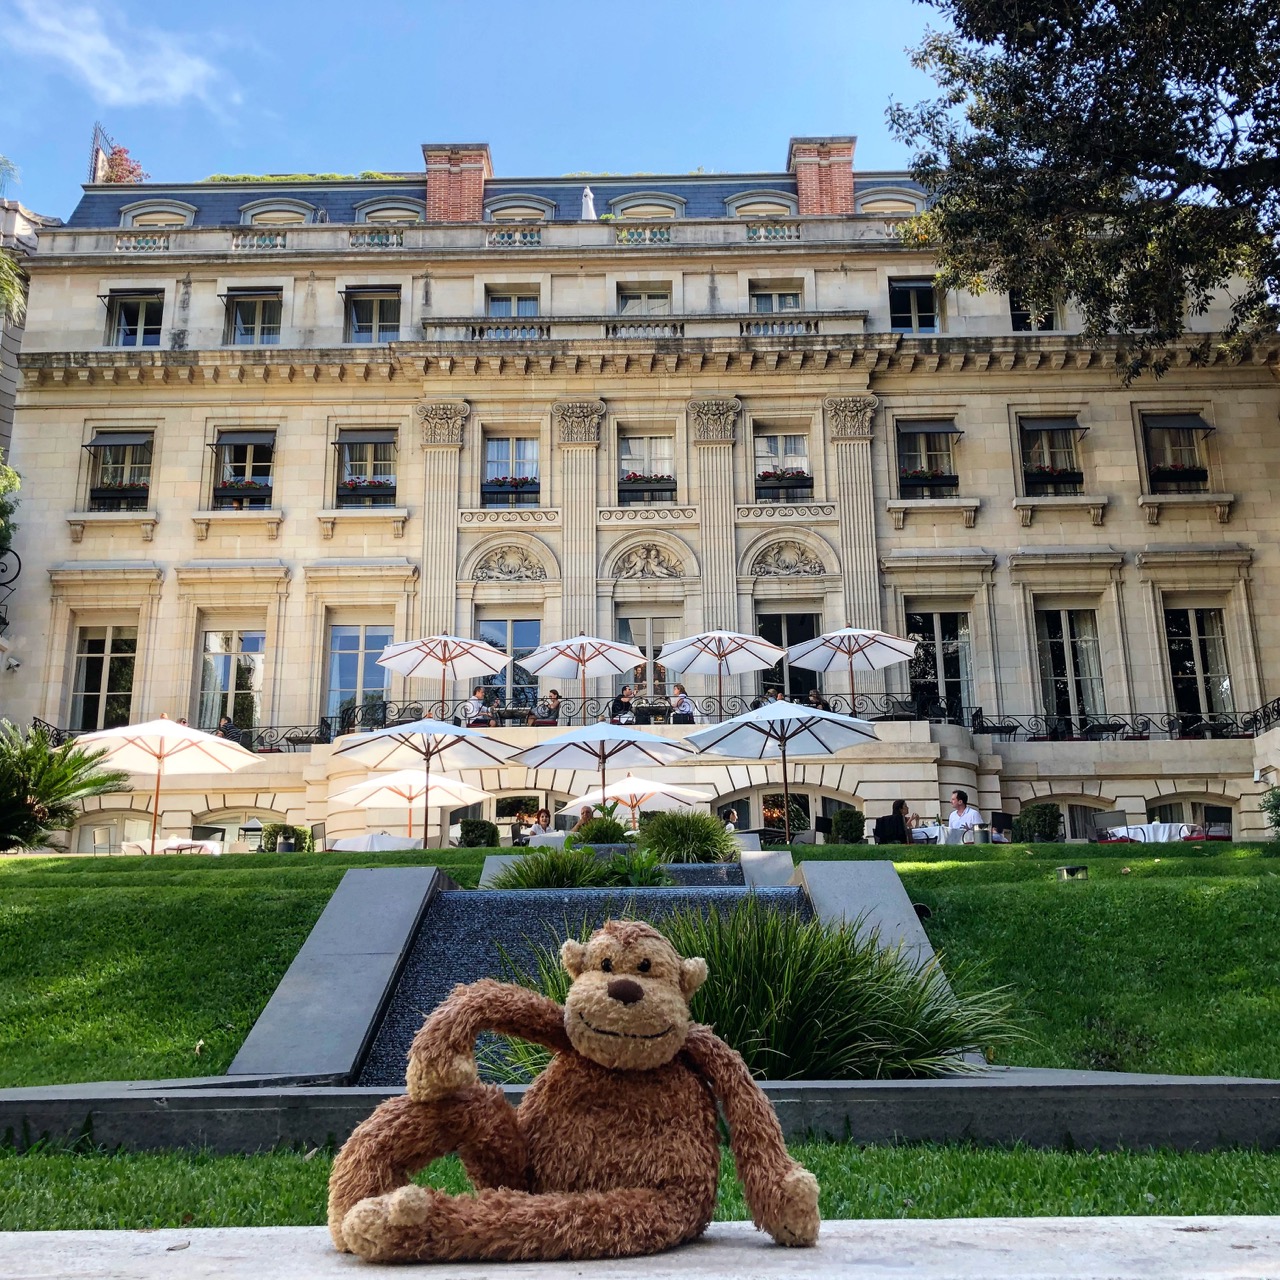 a stuffed animal sitting on a ledge in front of a large building